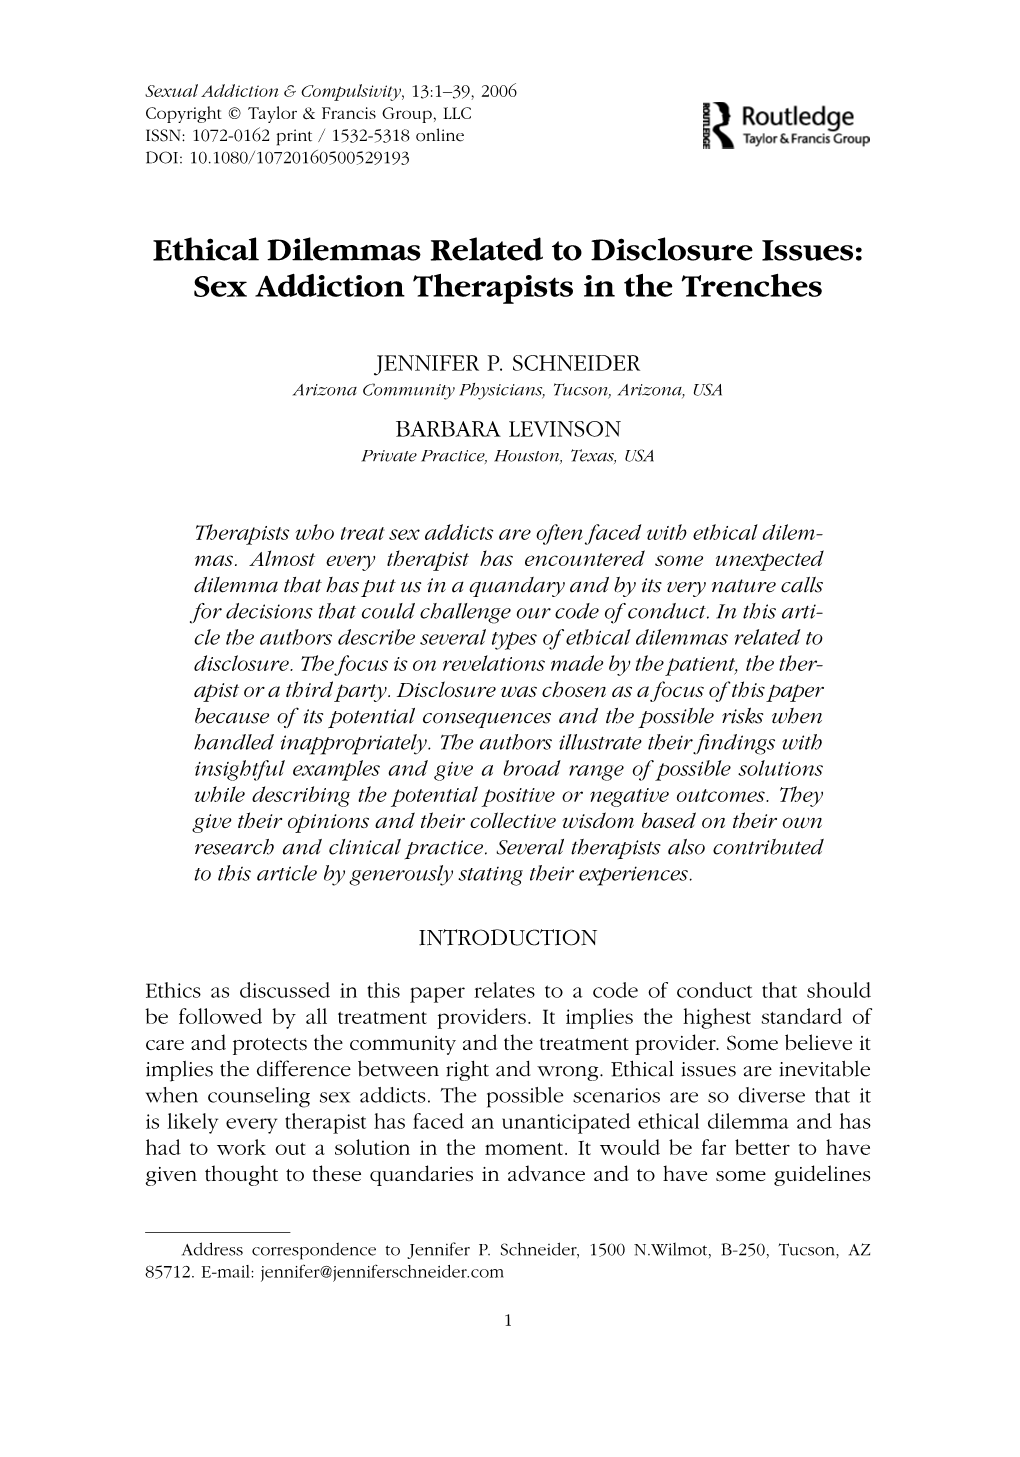 Ethical Dilemmas Related to Disclosure Issues: Sex Addiction Therapists in the Trenches